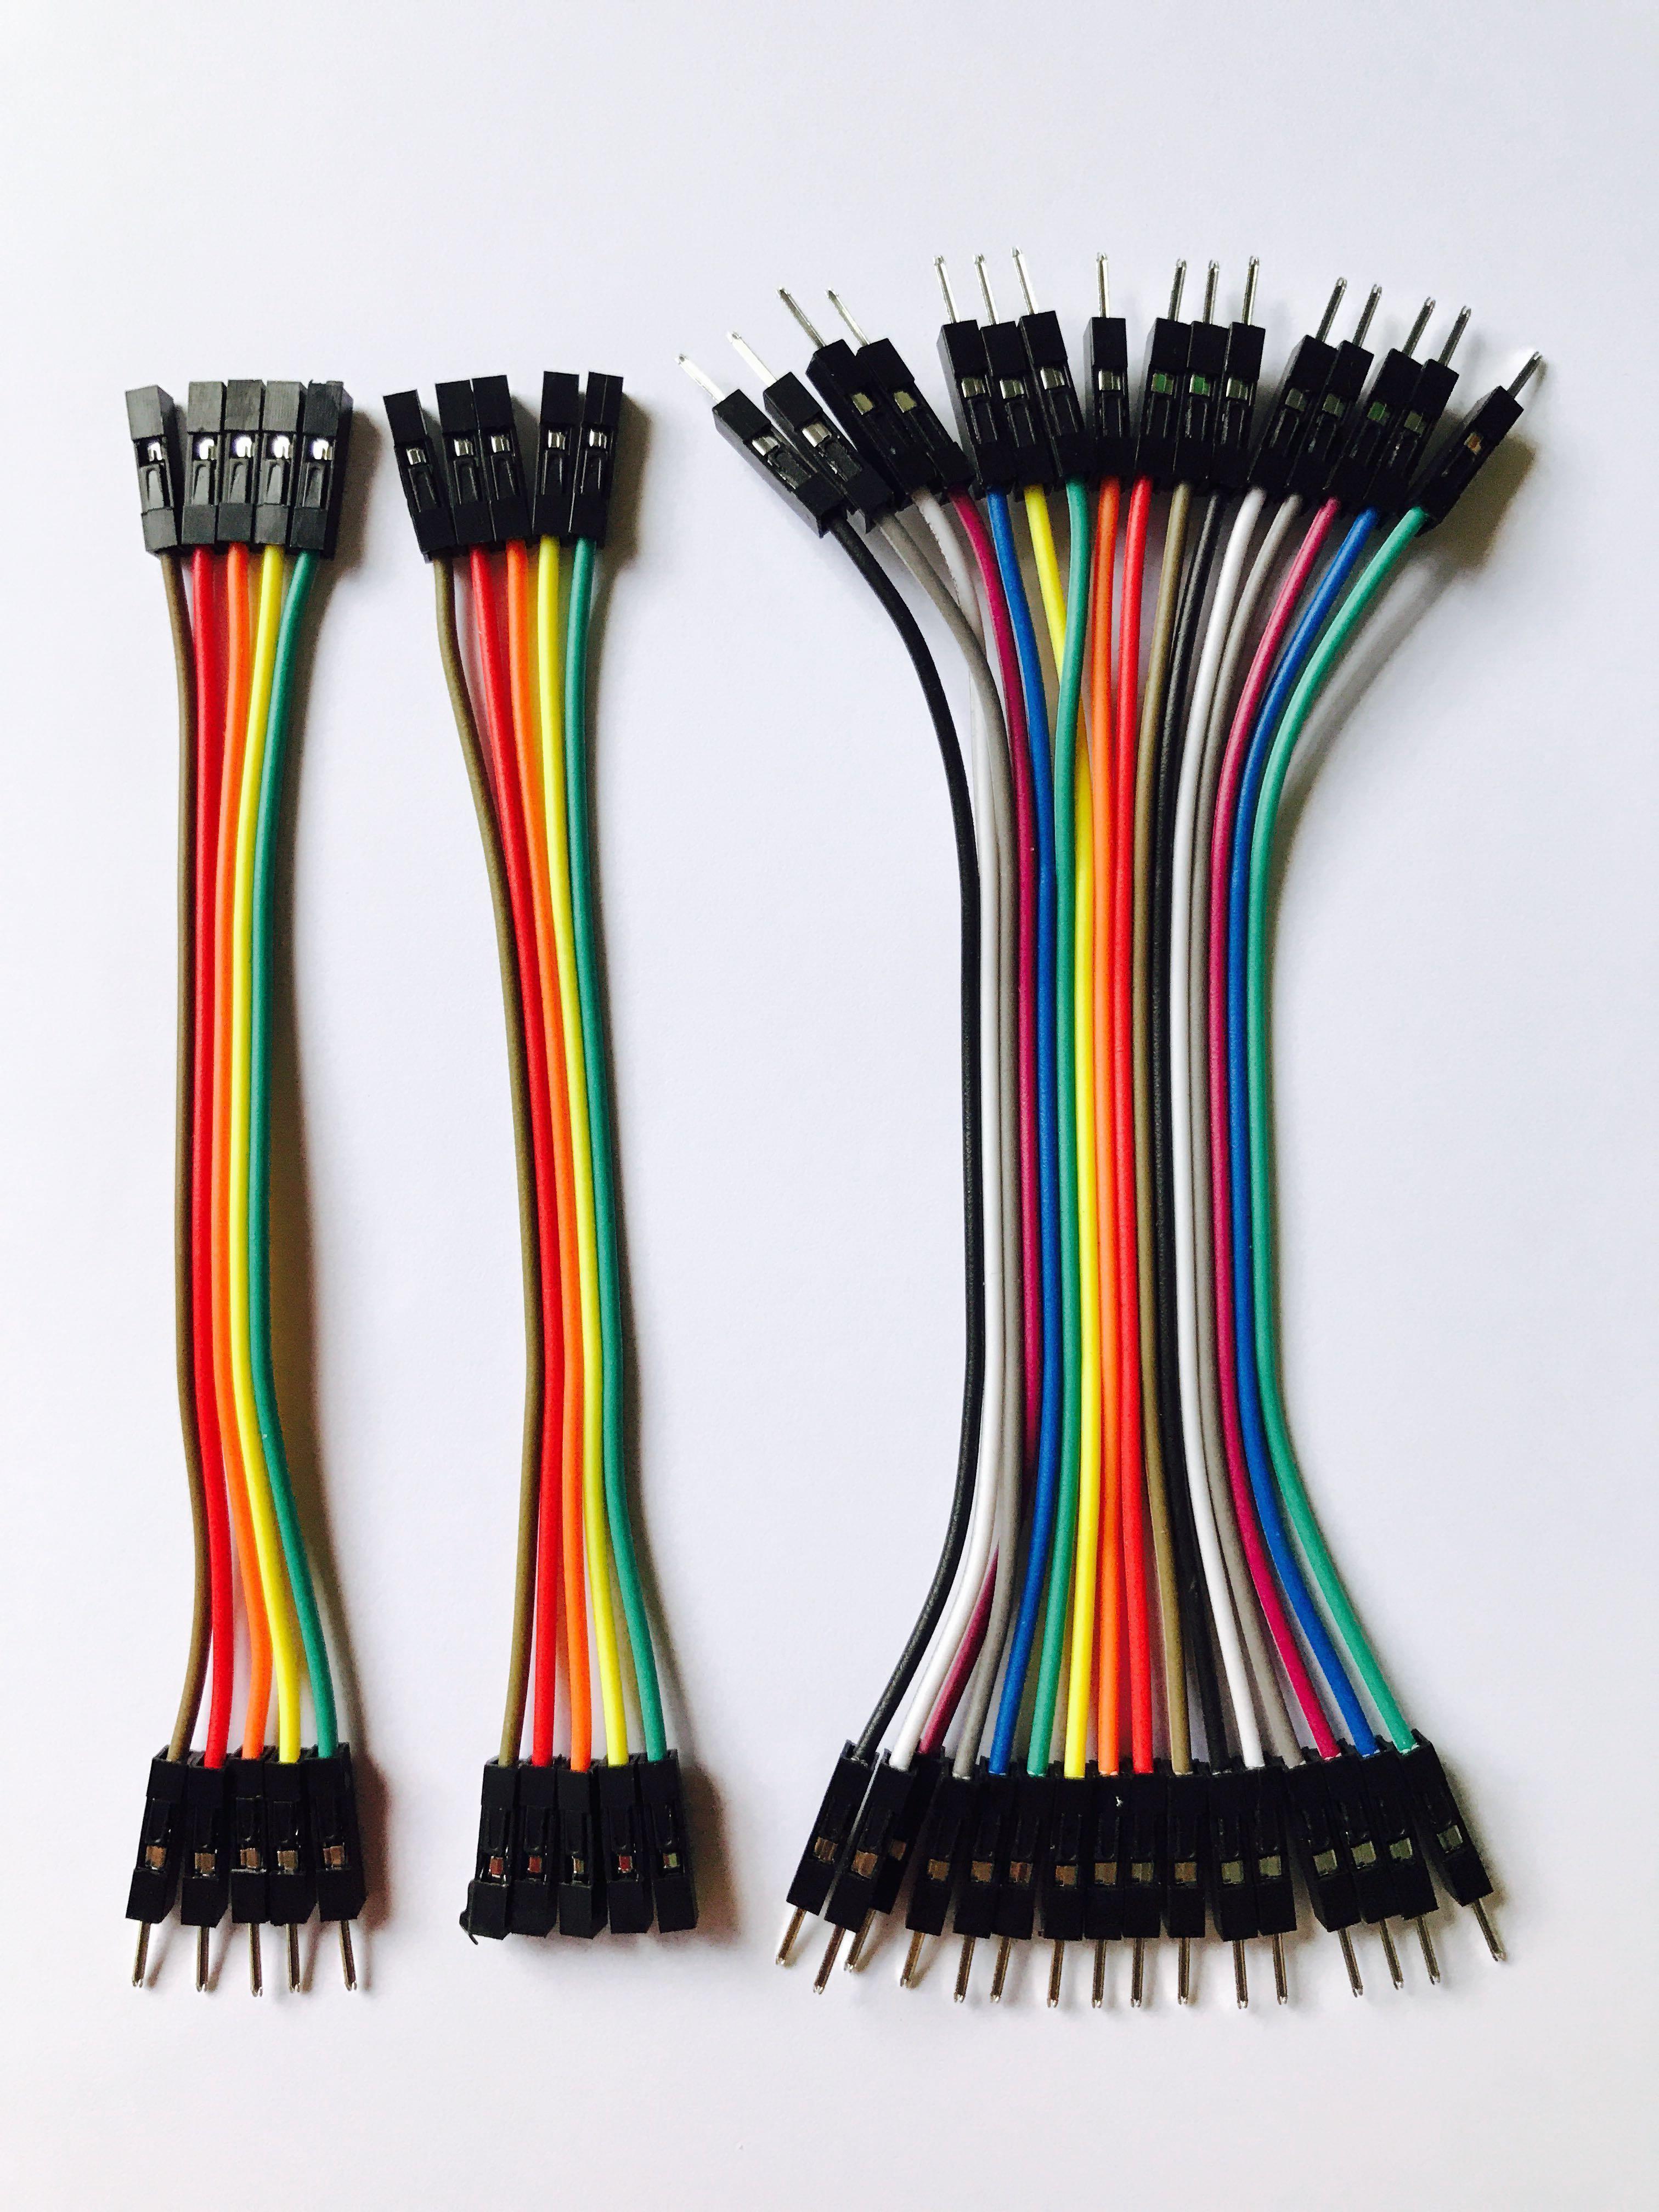 Generic Breadboard Jumper Wires Male To Female Dupont Cable For